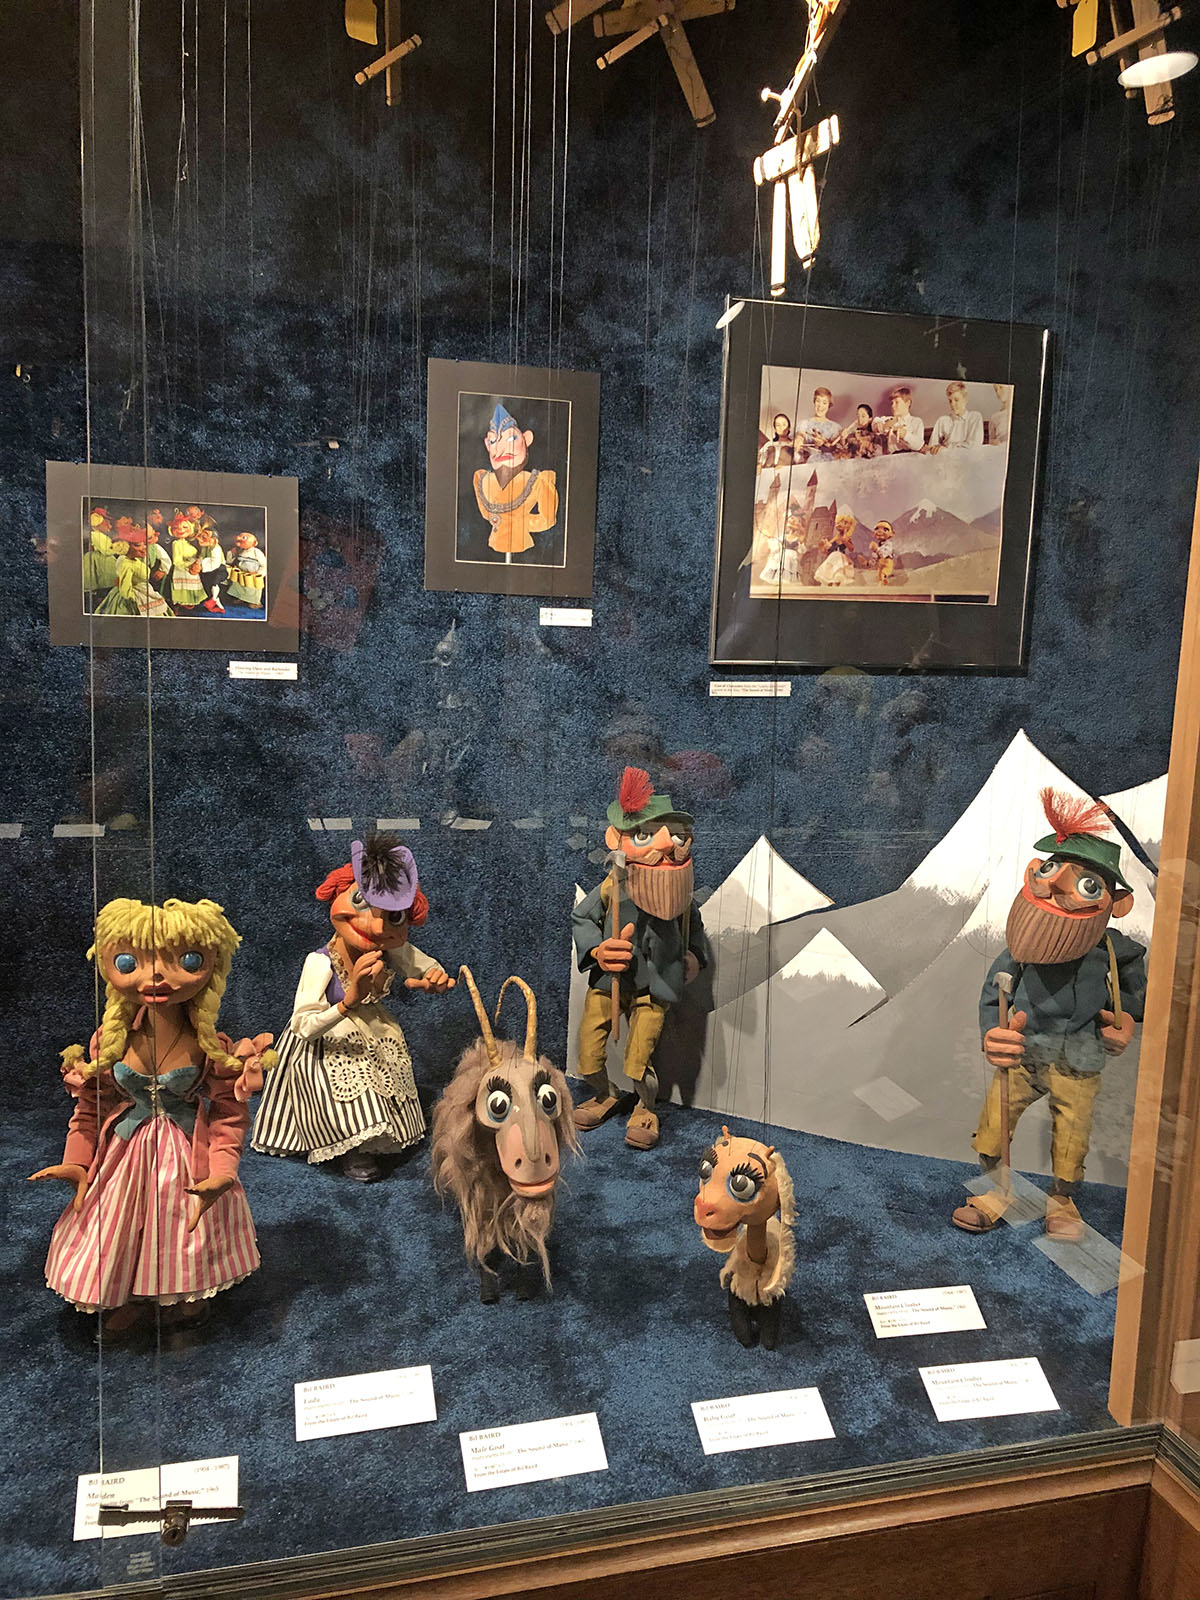 Bil Baird puppets from Sound of Music on display.